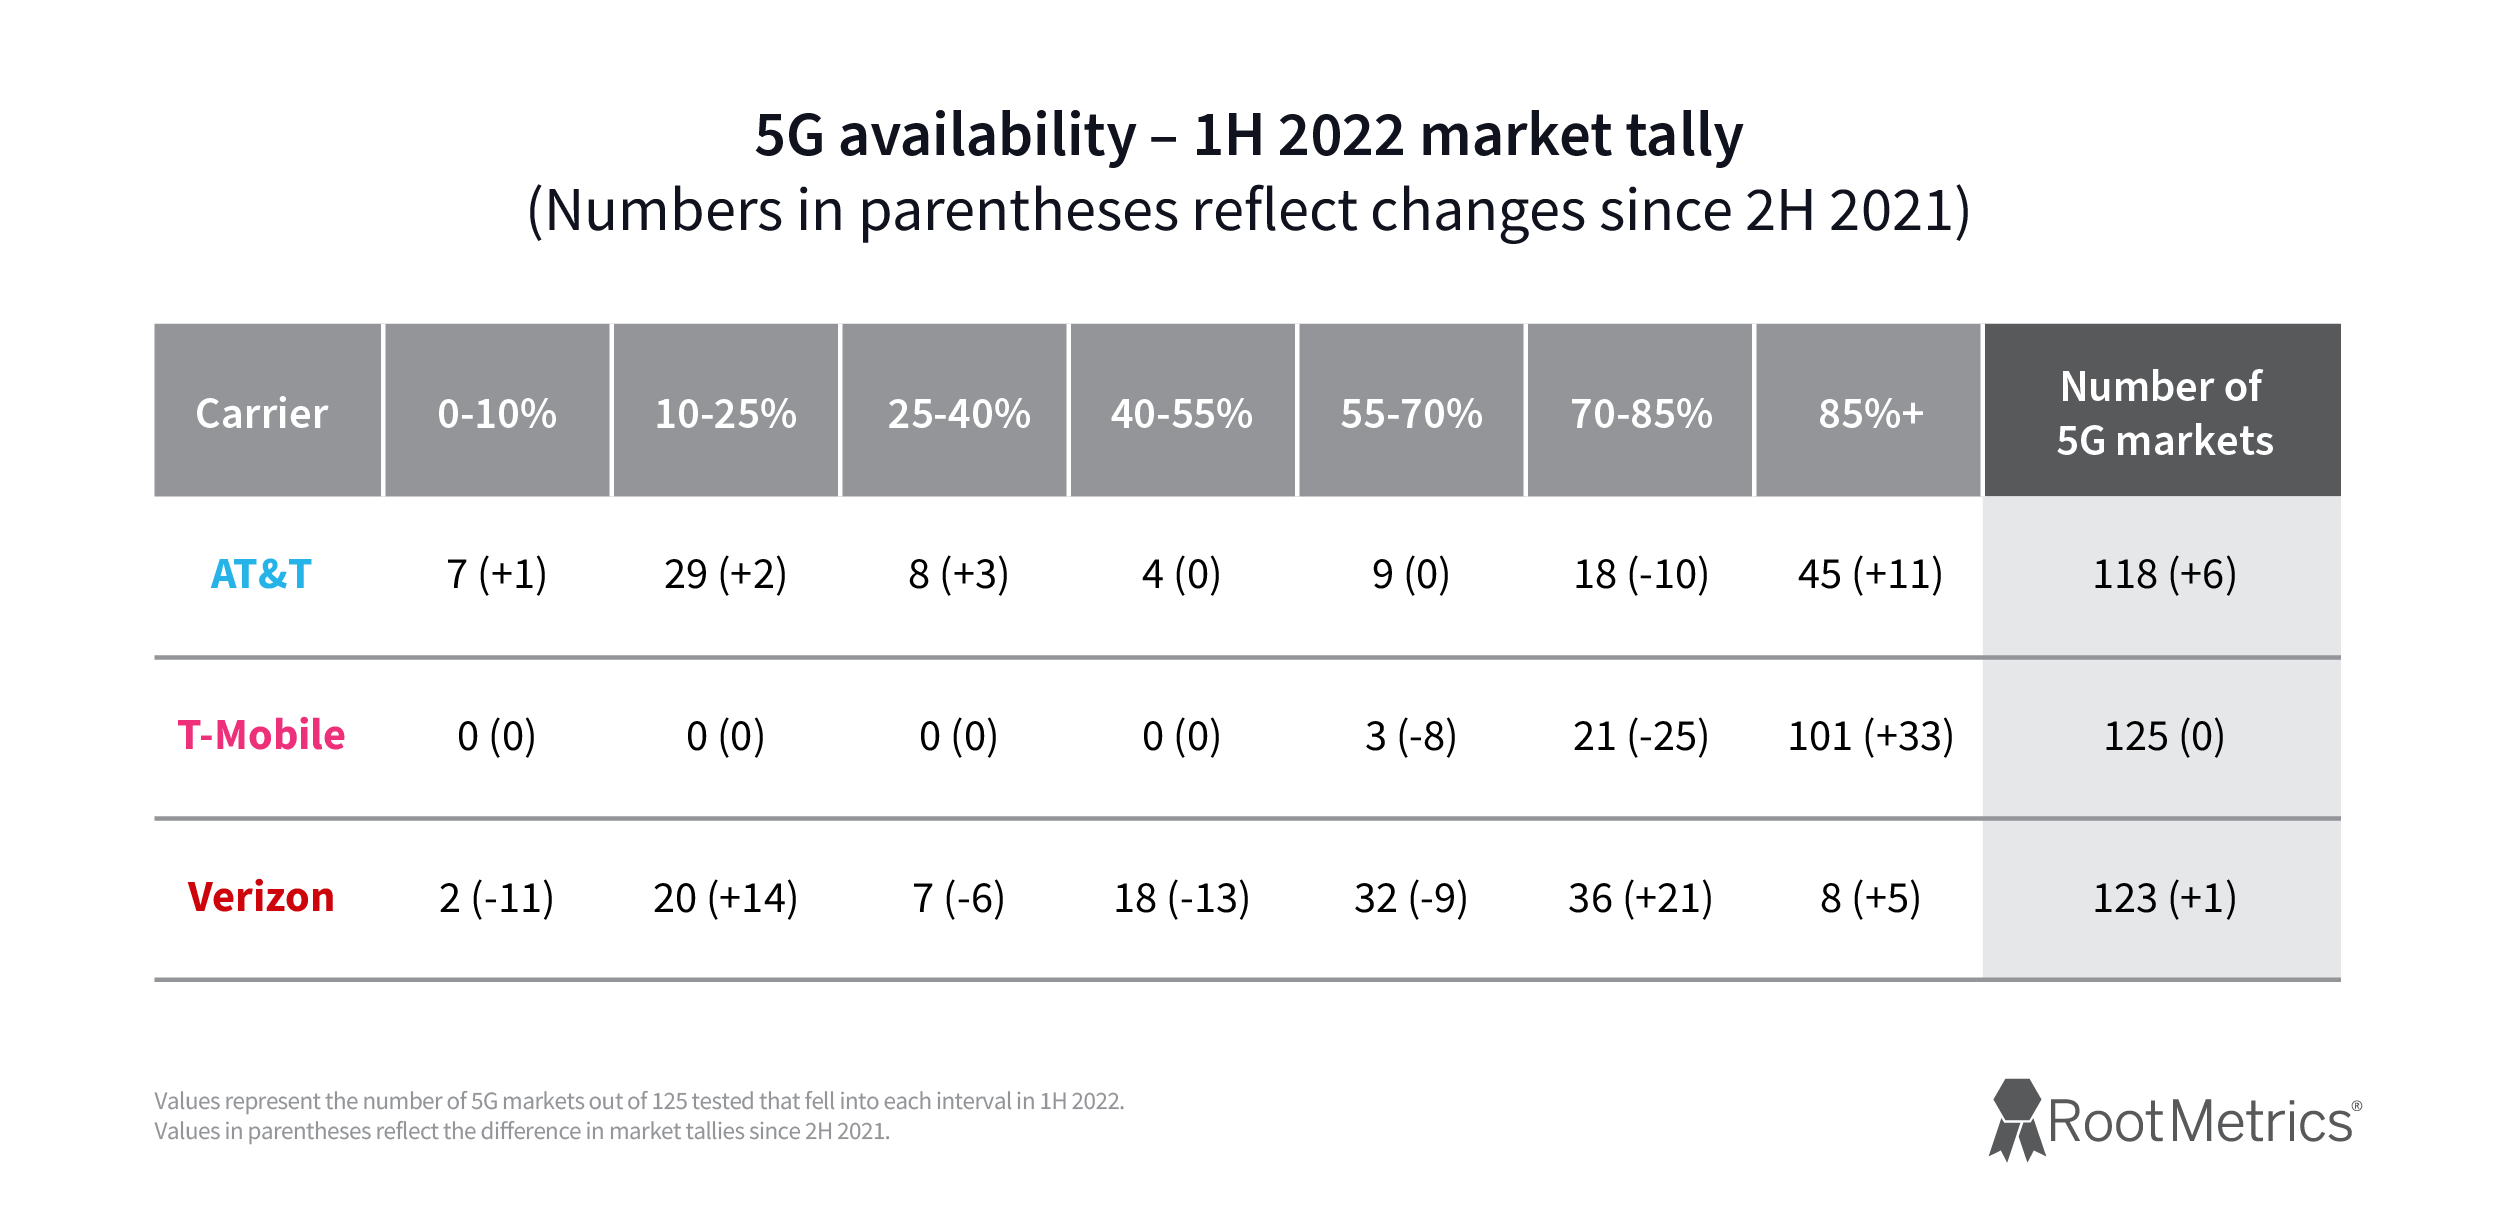 A graphic from RootMetrics showing 5G availability for 1H 2022